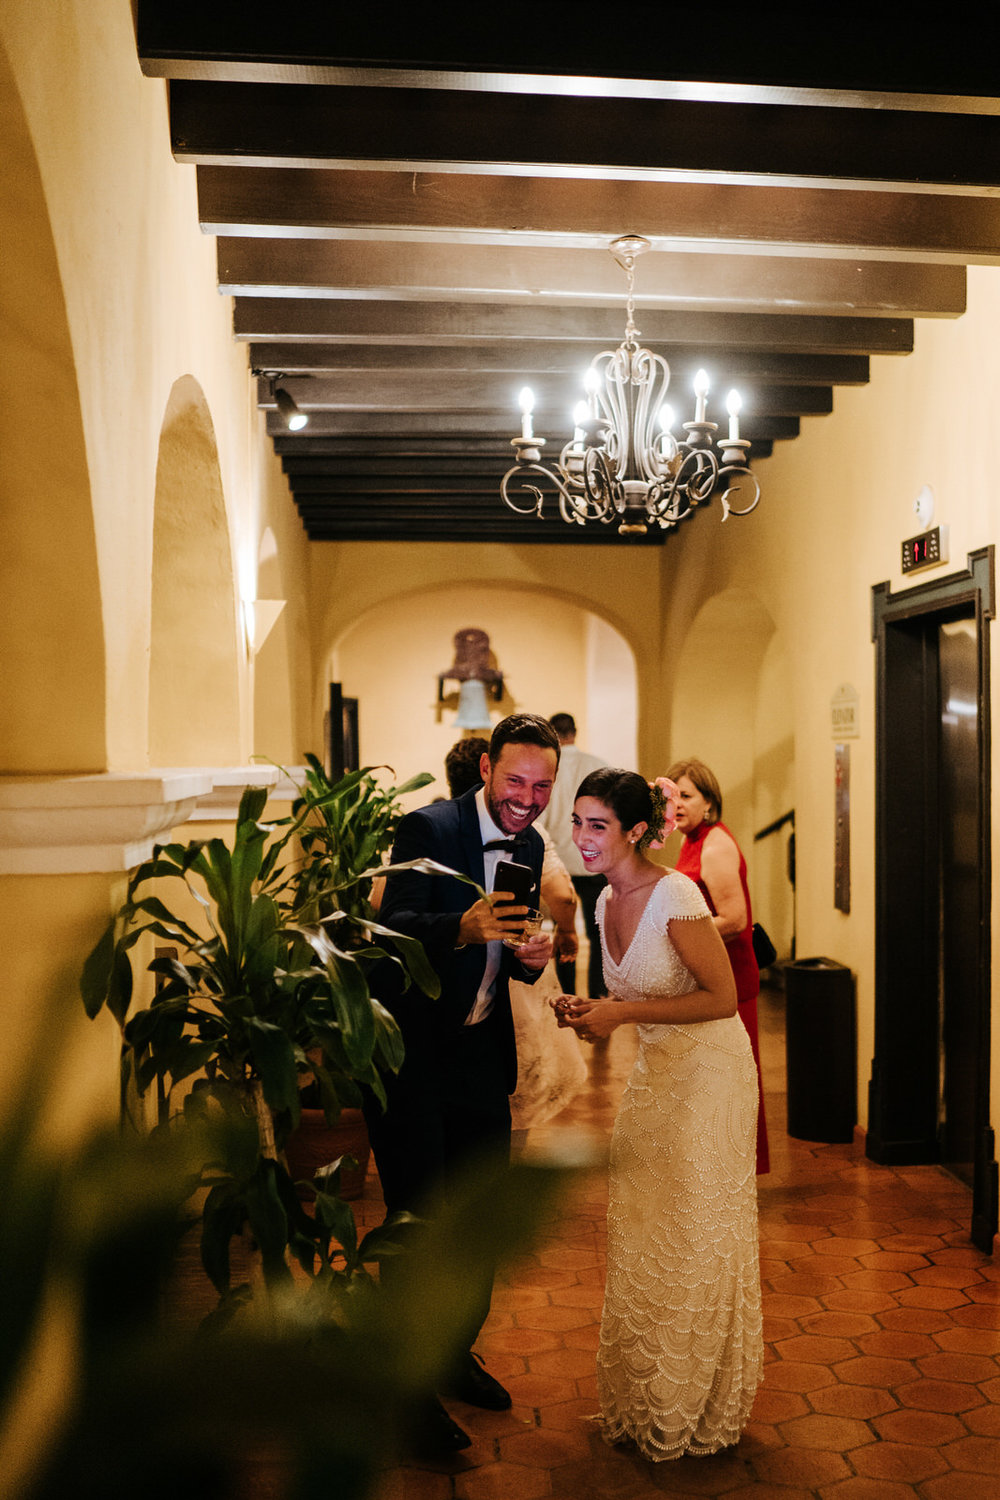  Bride stands in the hallway of the wedding venue as a friend shows her a photo on his phone and they both smile 